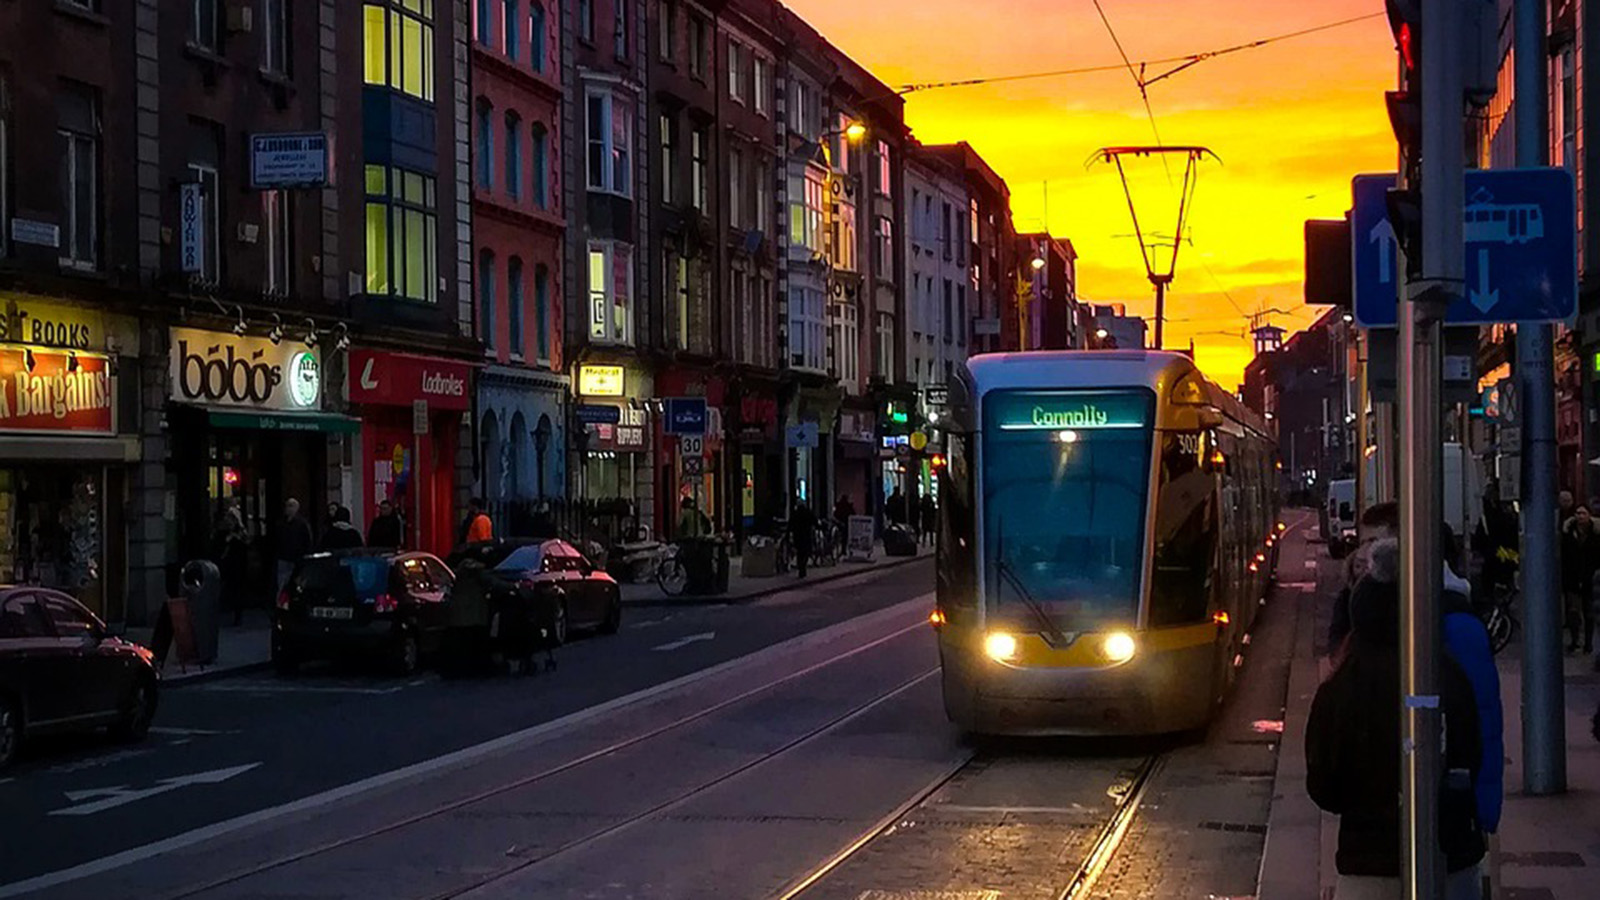 Train and city of Dublin at sunset